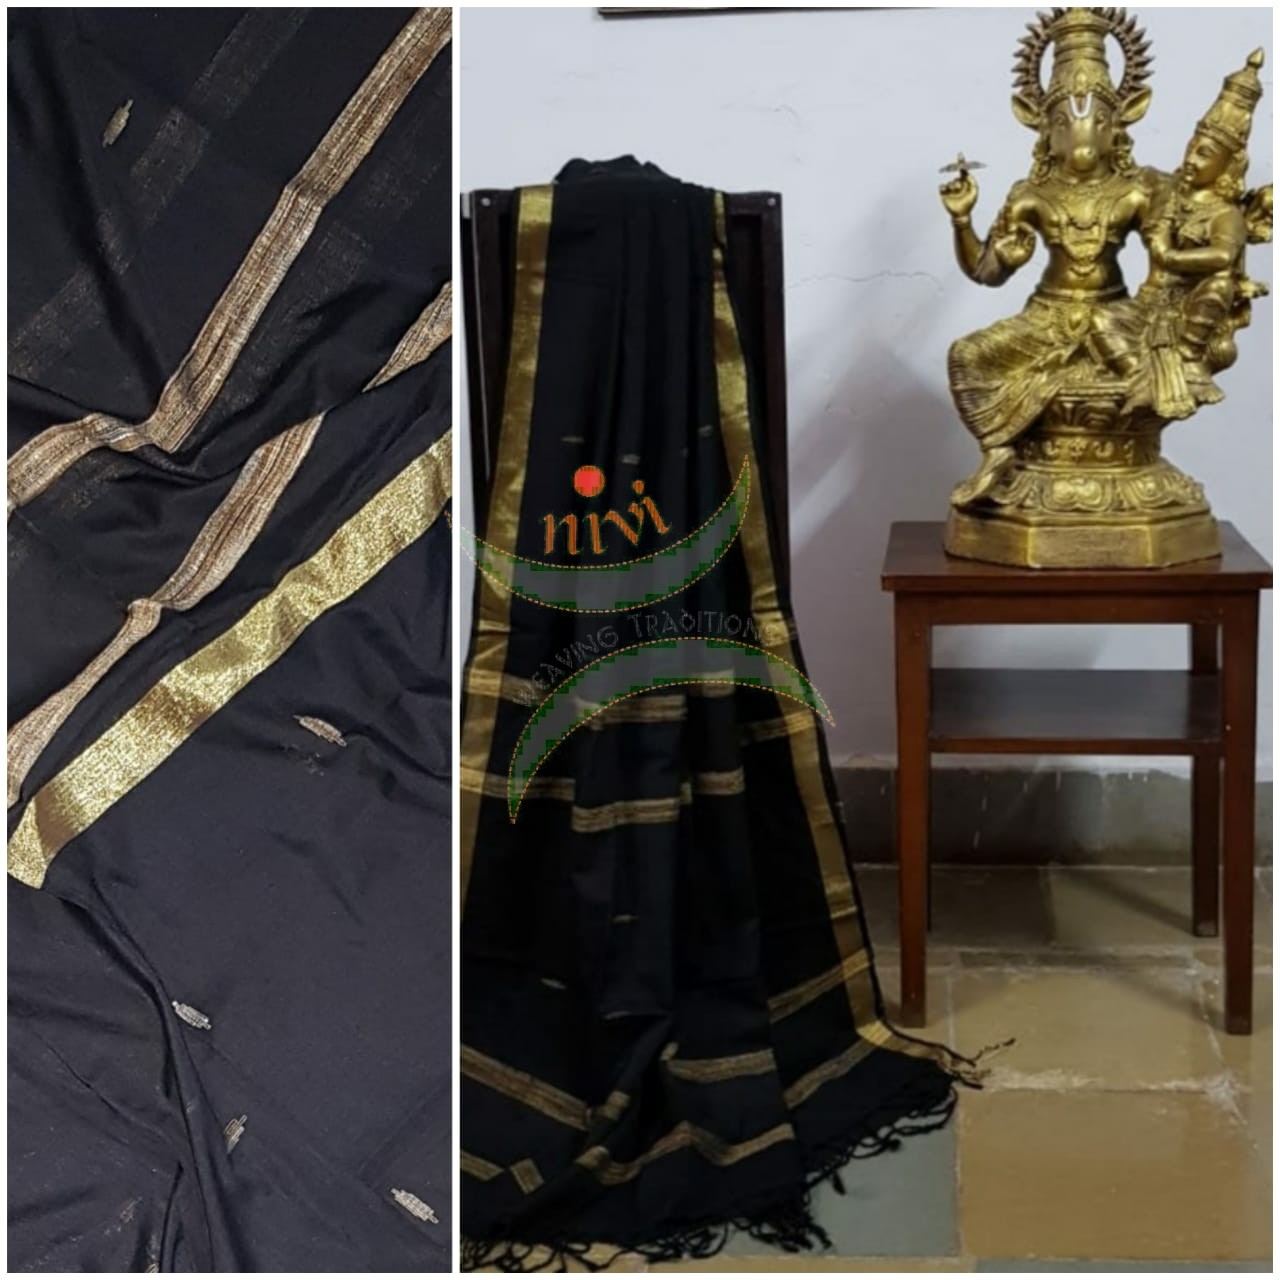 Black handloom dupatta with subtle gold borders, geecha stripes and all over buttis.